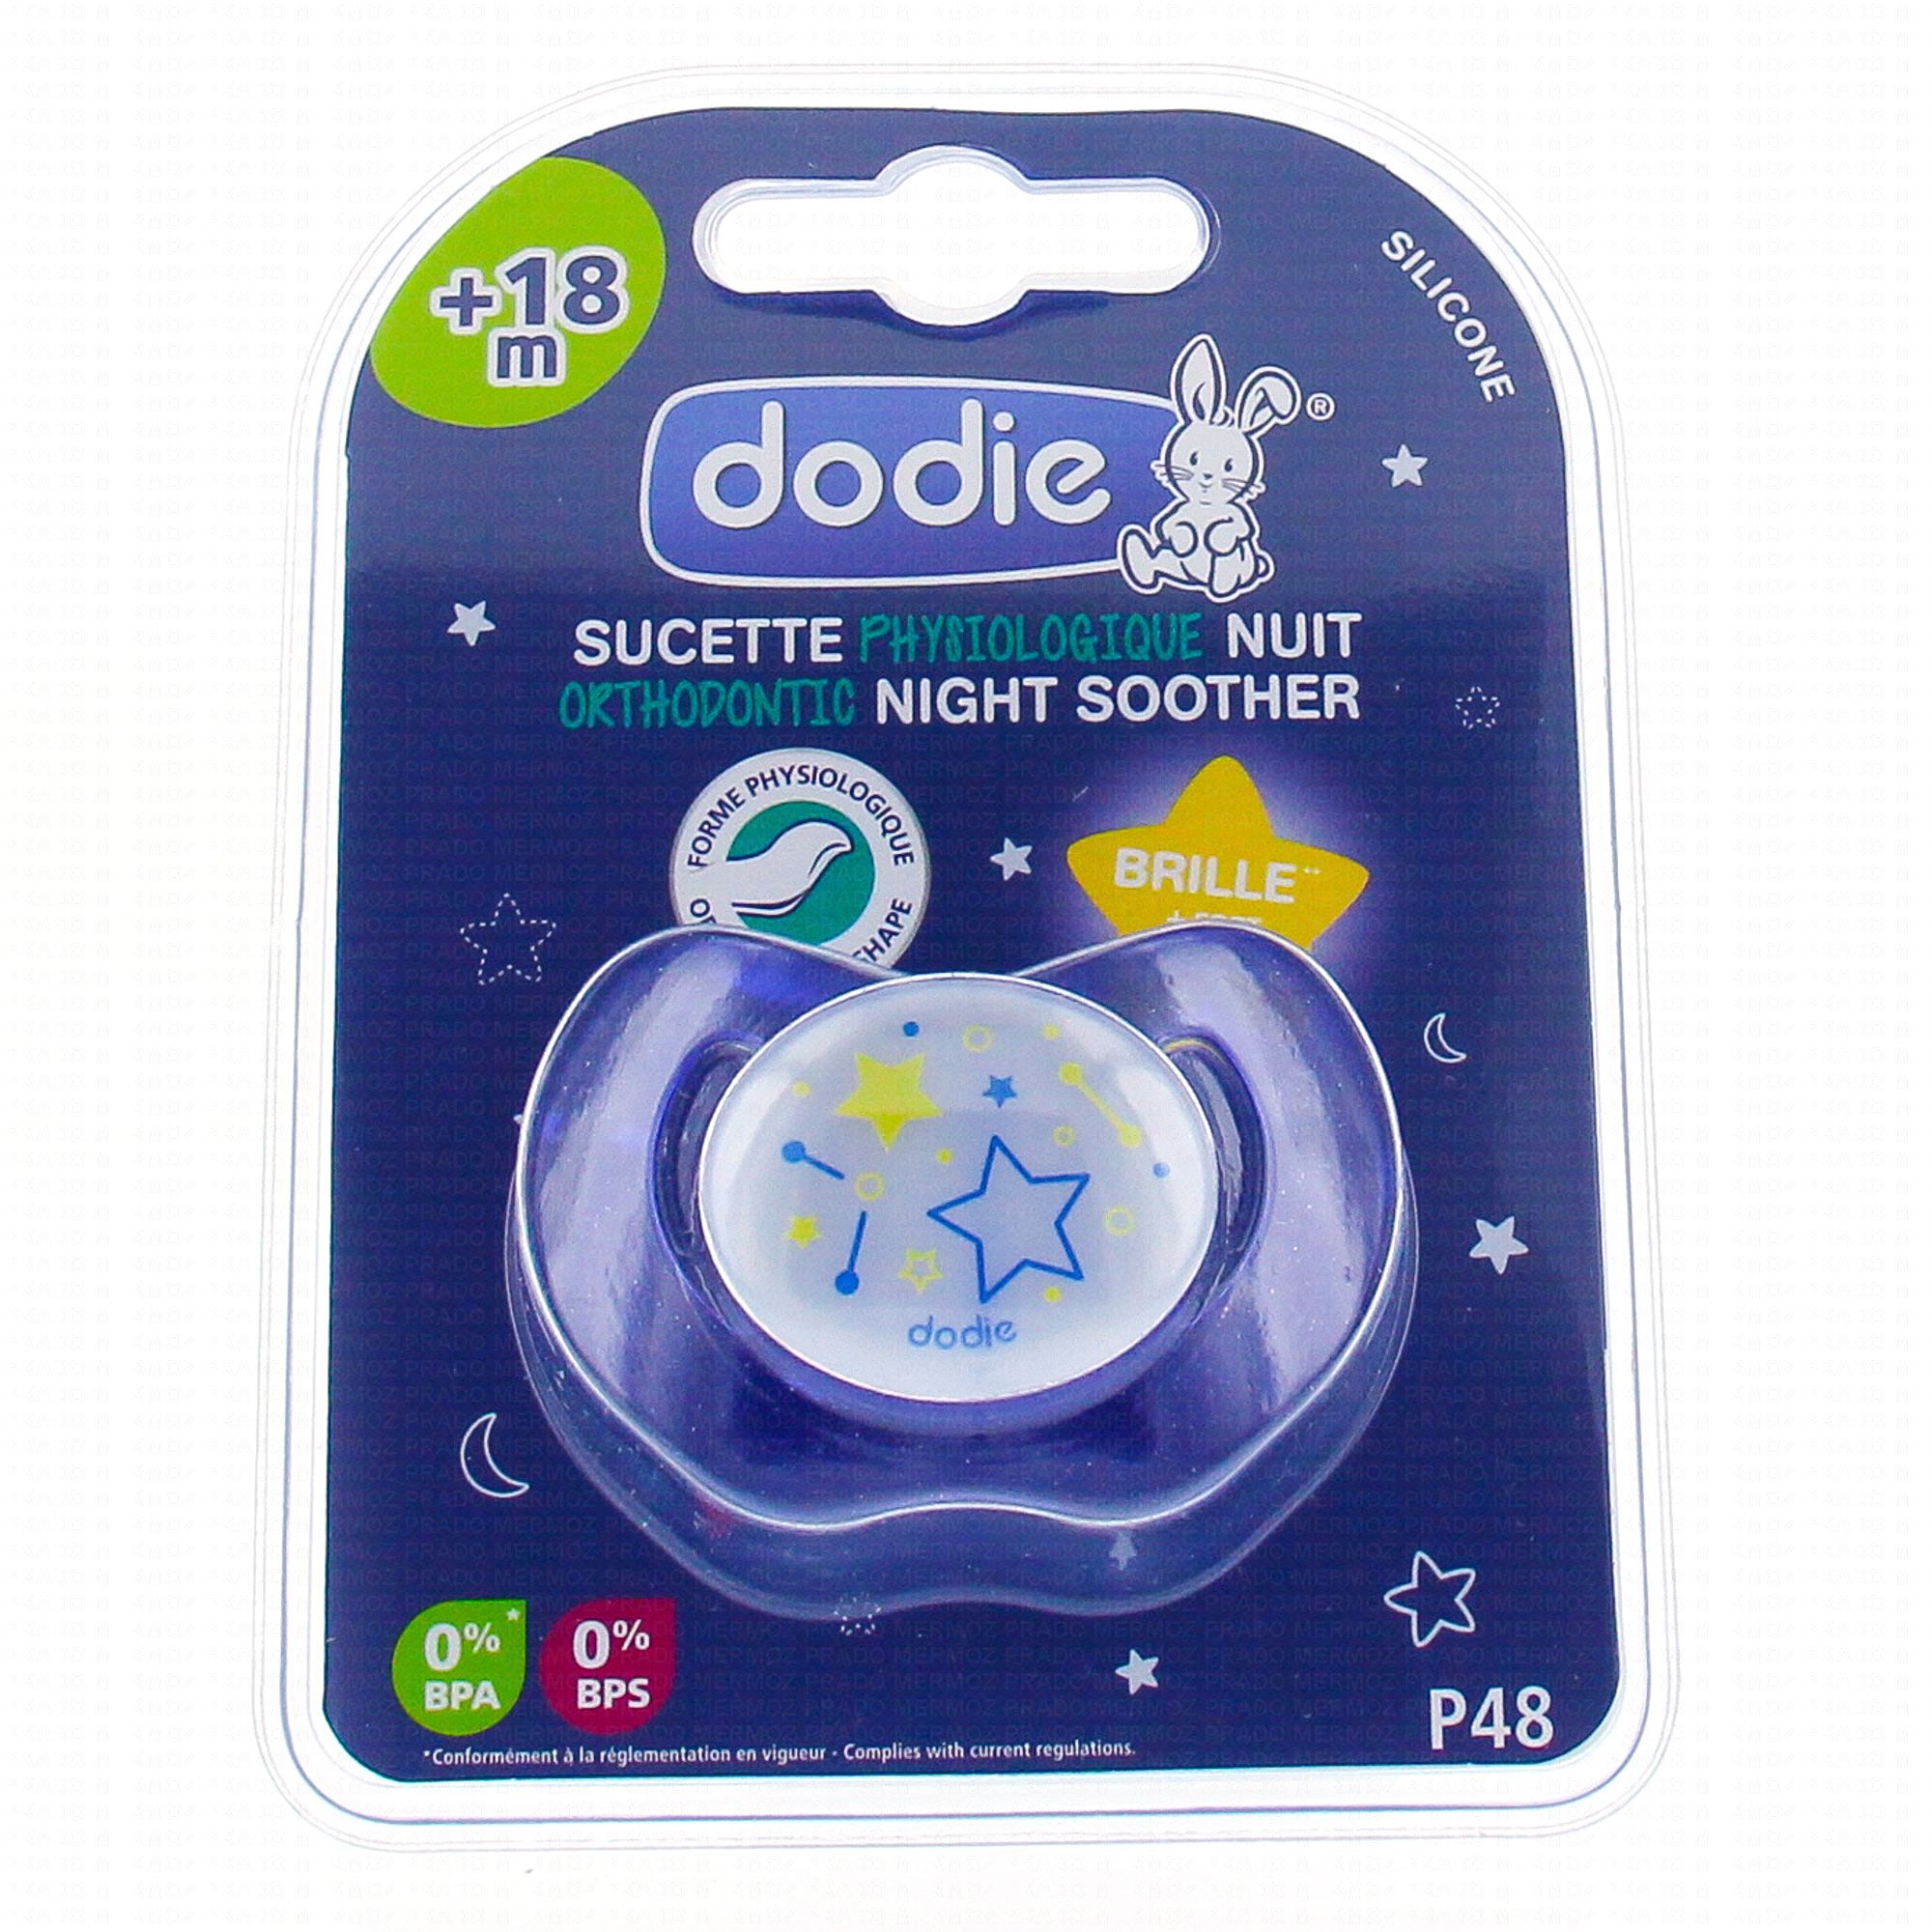 MAM Duo sucettes +18 mois anatomiques nuit silicone REF 40